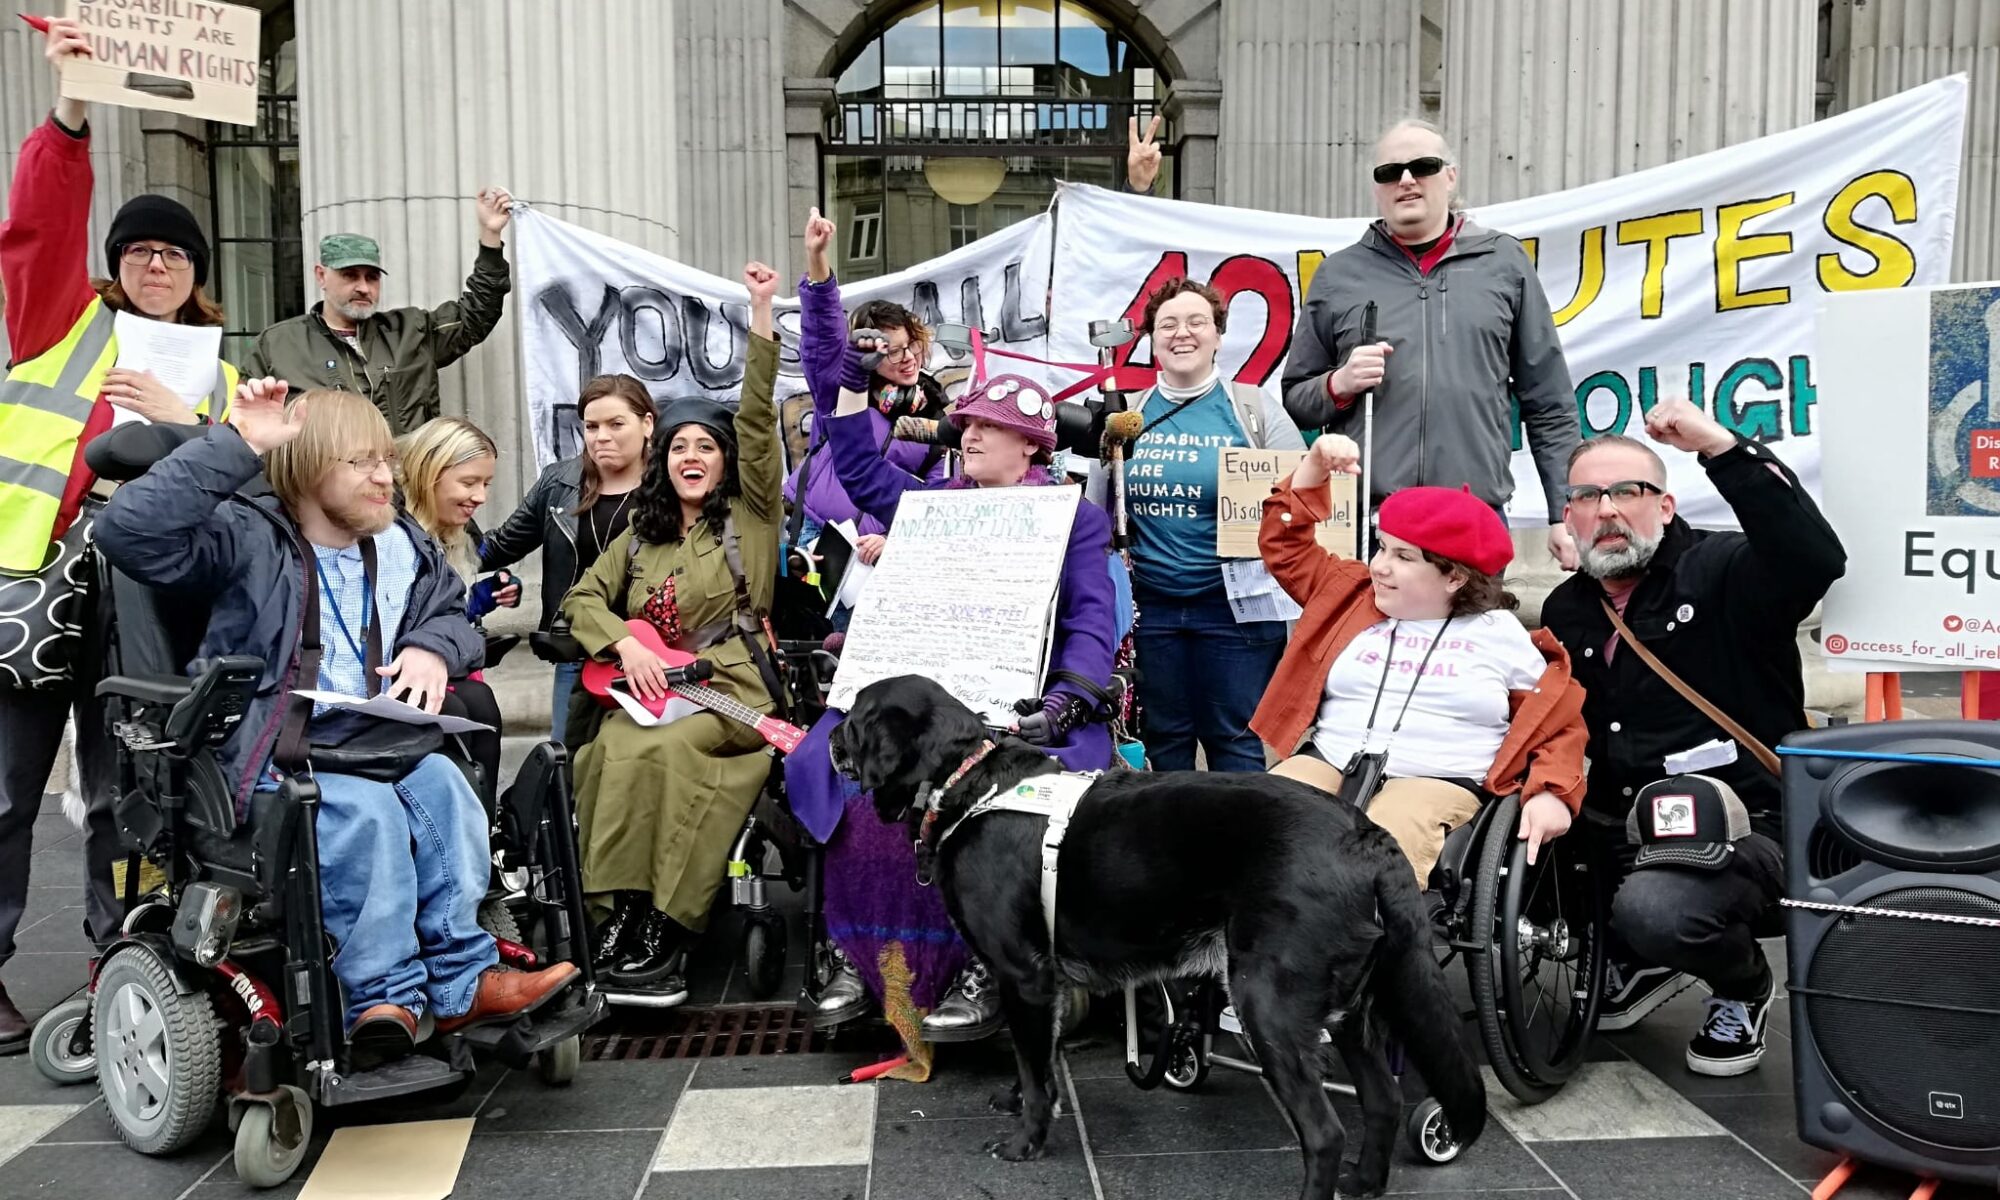 Image shows a group of protesters with raised fists outside the GPO. Included from the right are Ross Coleman, a man with blonde hair waving in a leather jacket and wheelchair beside him, Leesa Flynn with blonde hair smiling, Maryam Madani holding a red ukulele with raised fist and smile, with brown skin, black hair, black leather beret and Countess Markievicz costume, Isolde O'Brolcháin Carmody holding up Peadar's Declaration of Independent Living signed by attendees wearing a purple hat and sunglasses with her black lab assistance dog, Sophia Mulvaney wearing a red beret with raised fist on a wheelchair with white t-shirt and a pink-red cardigan, Bernard Mulvaney beside her wearing a black jacket with raised fist, a woman with long white hair with her golden lab assistance dog beside him and a sign which says "Equality". Behind them is Angela Mazzocco wearing a blue t-shirt, Declan Meenagh with his cane, Grainne Hallahan in a leather jacket, Charlie Mullowney smiling & protesters from the IRC campout